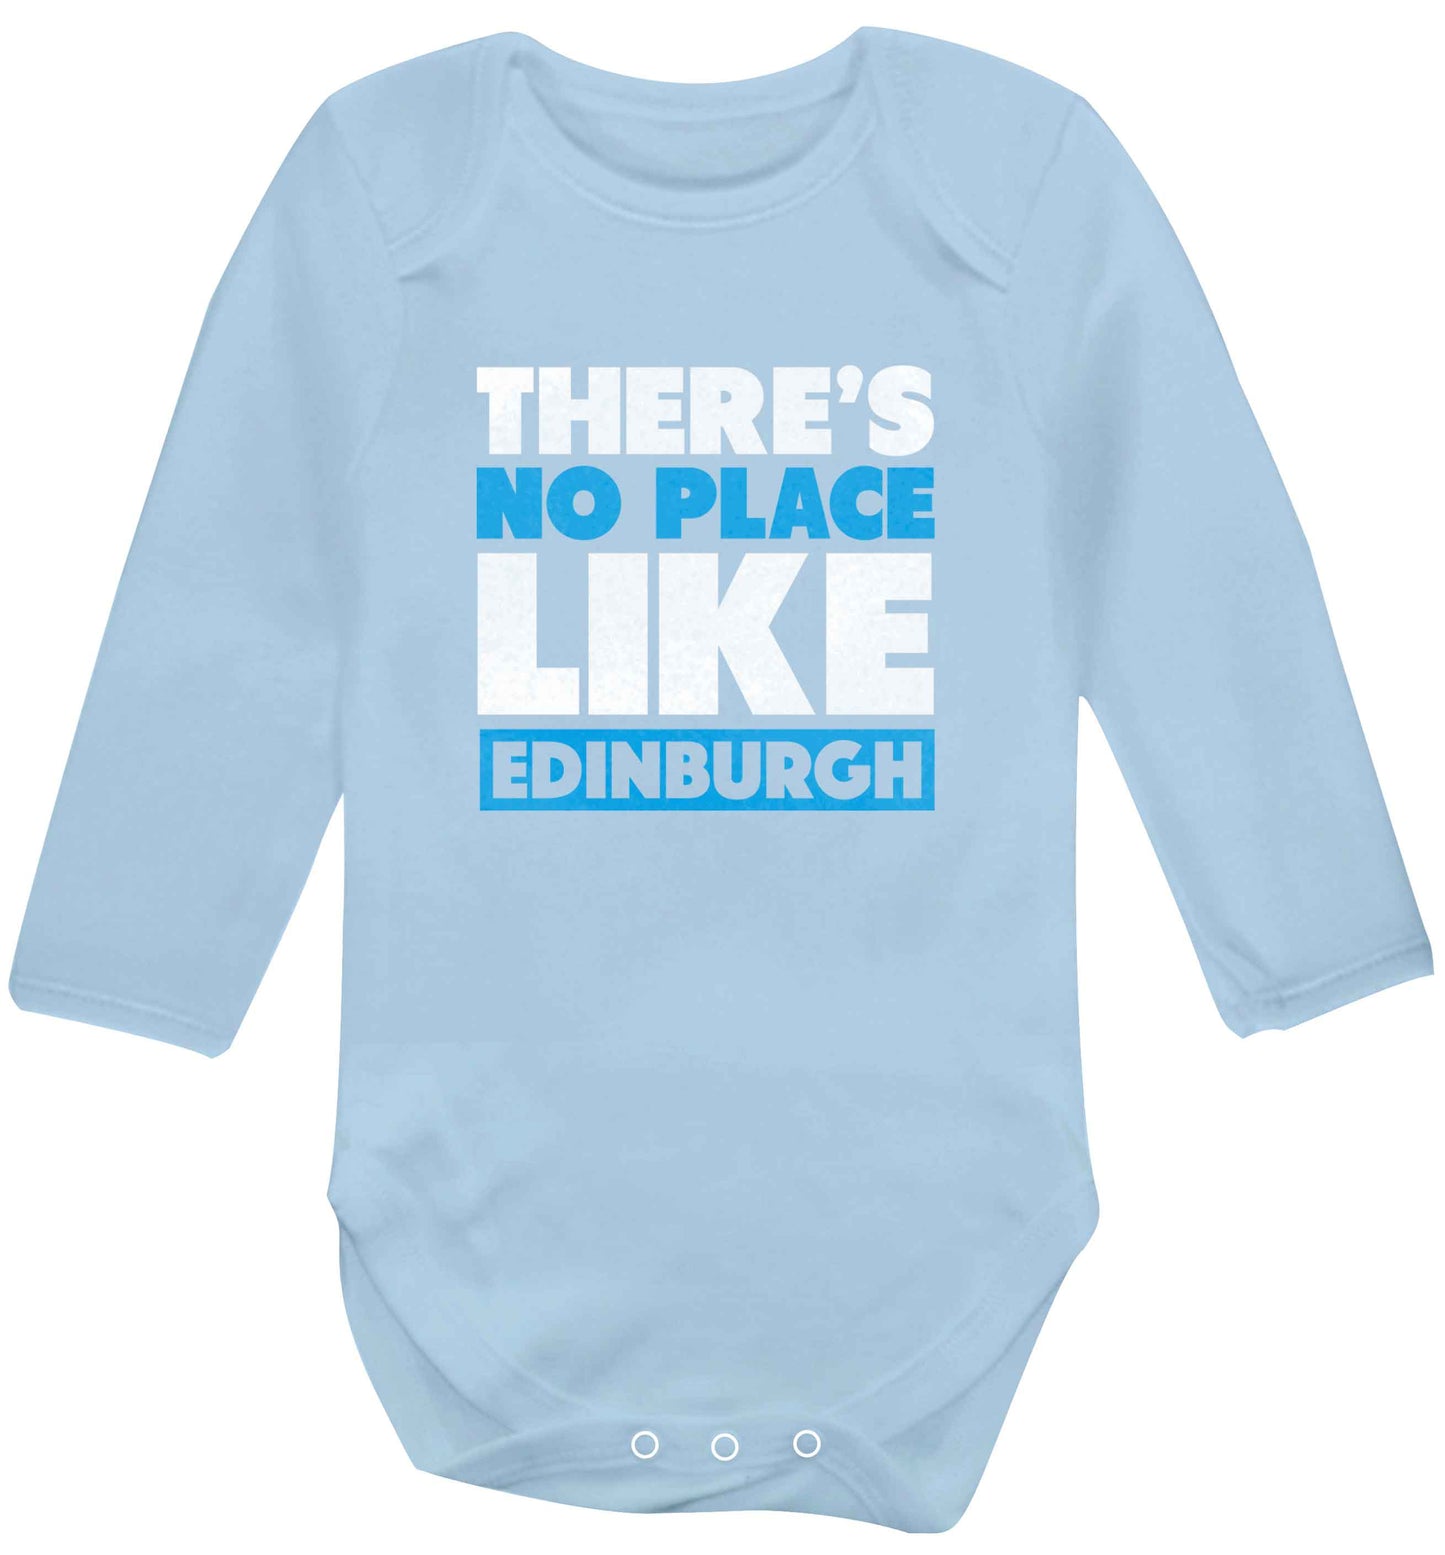 There's no place like Edinburgh baby vest long sleeved pale blue 6-12 months